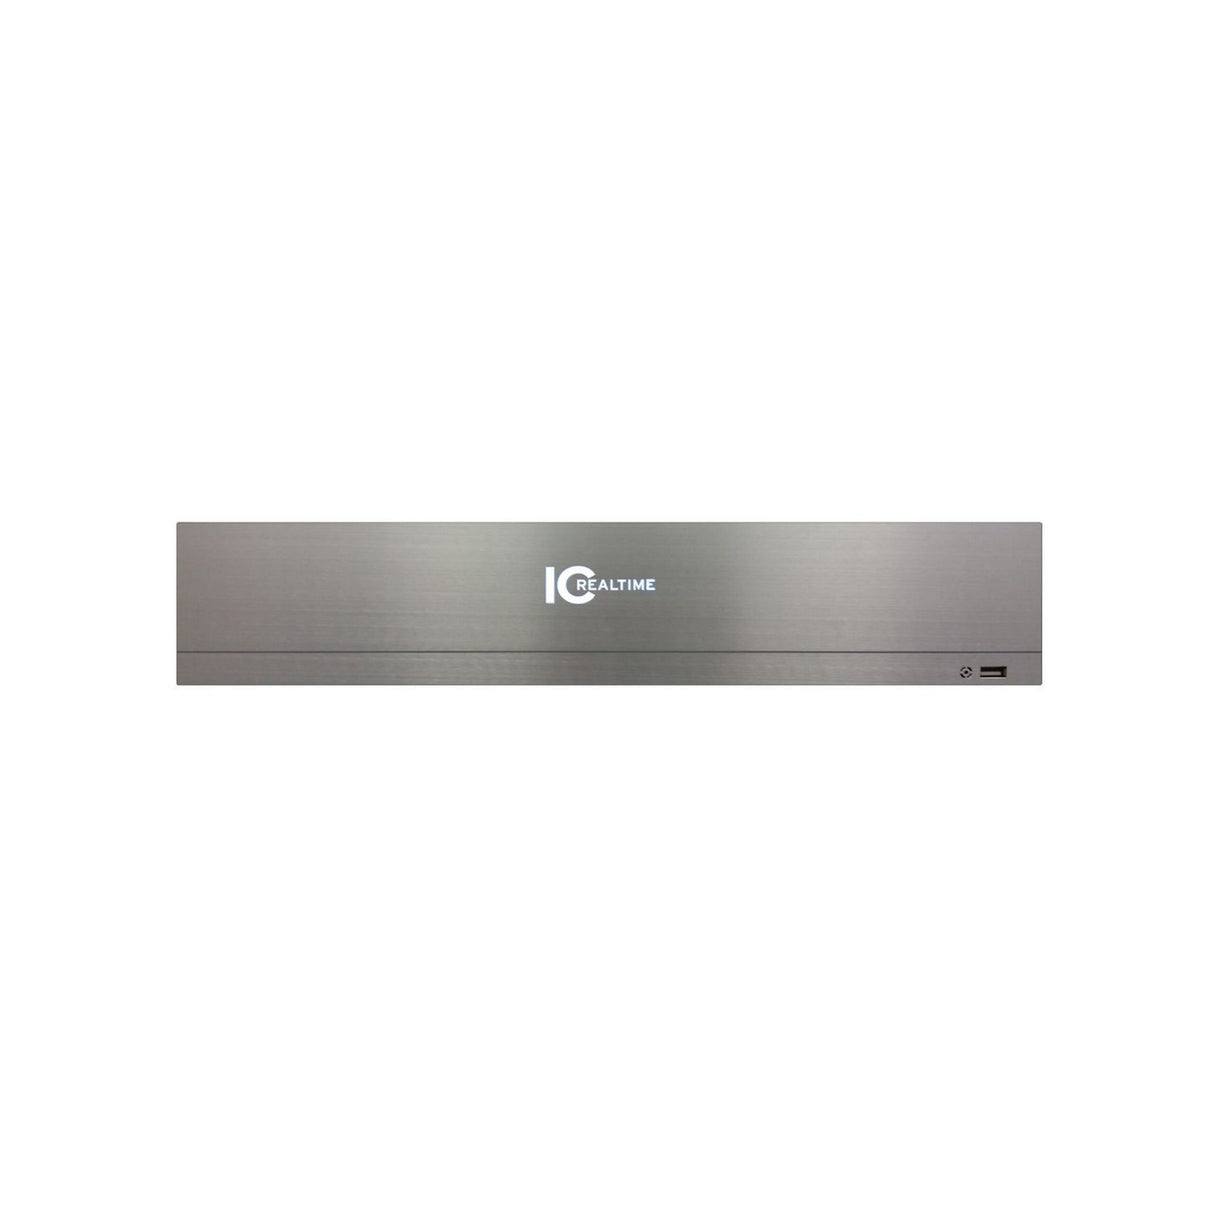 IC Realtime AVR-832S 32 Channel IP 2U Rackmount Multi-Signal AVR with 8TB Hard Drive